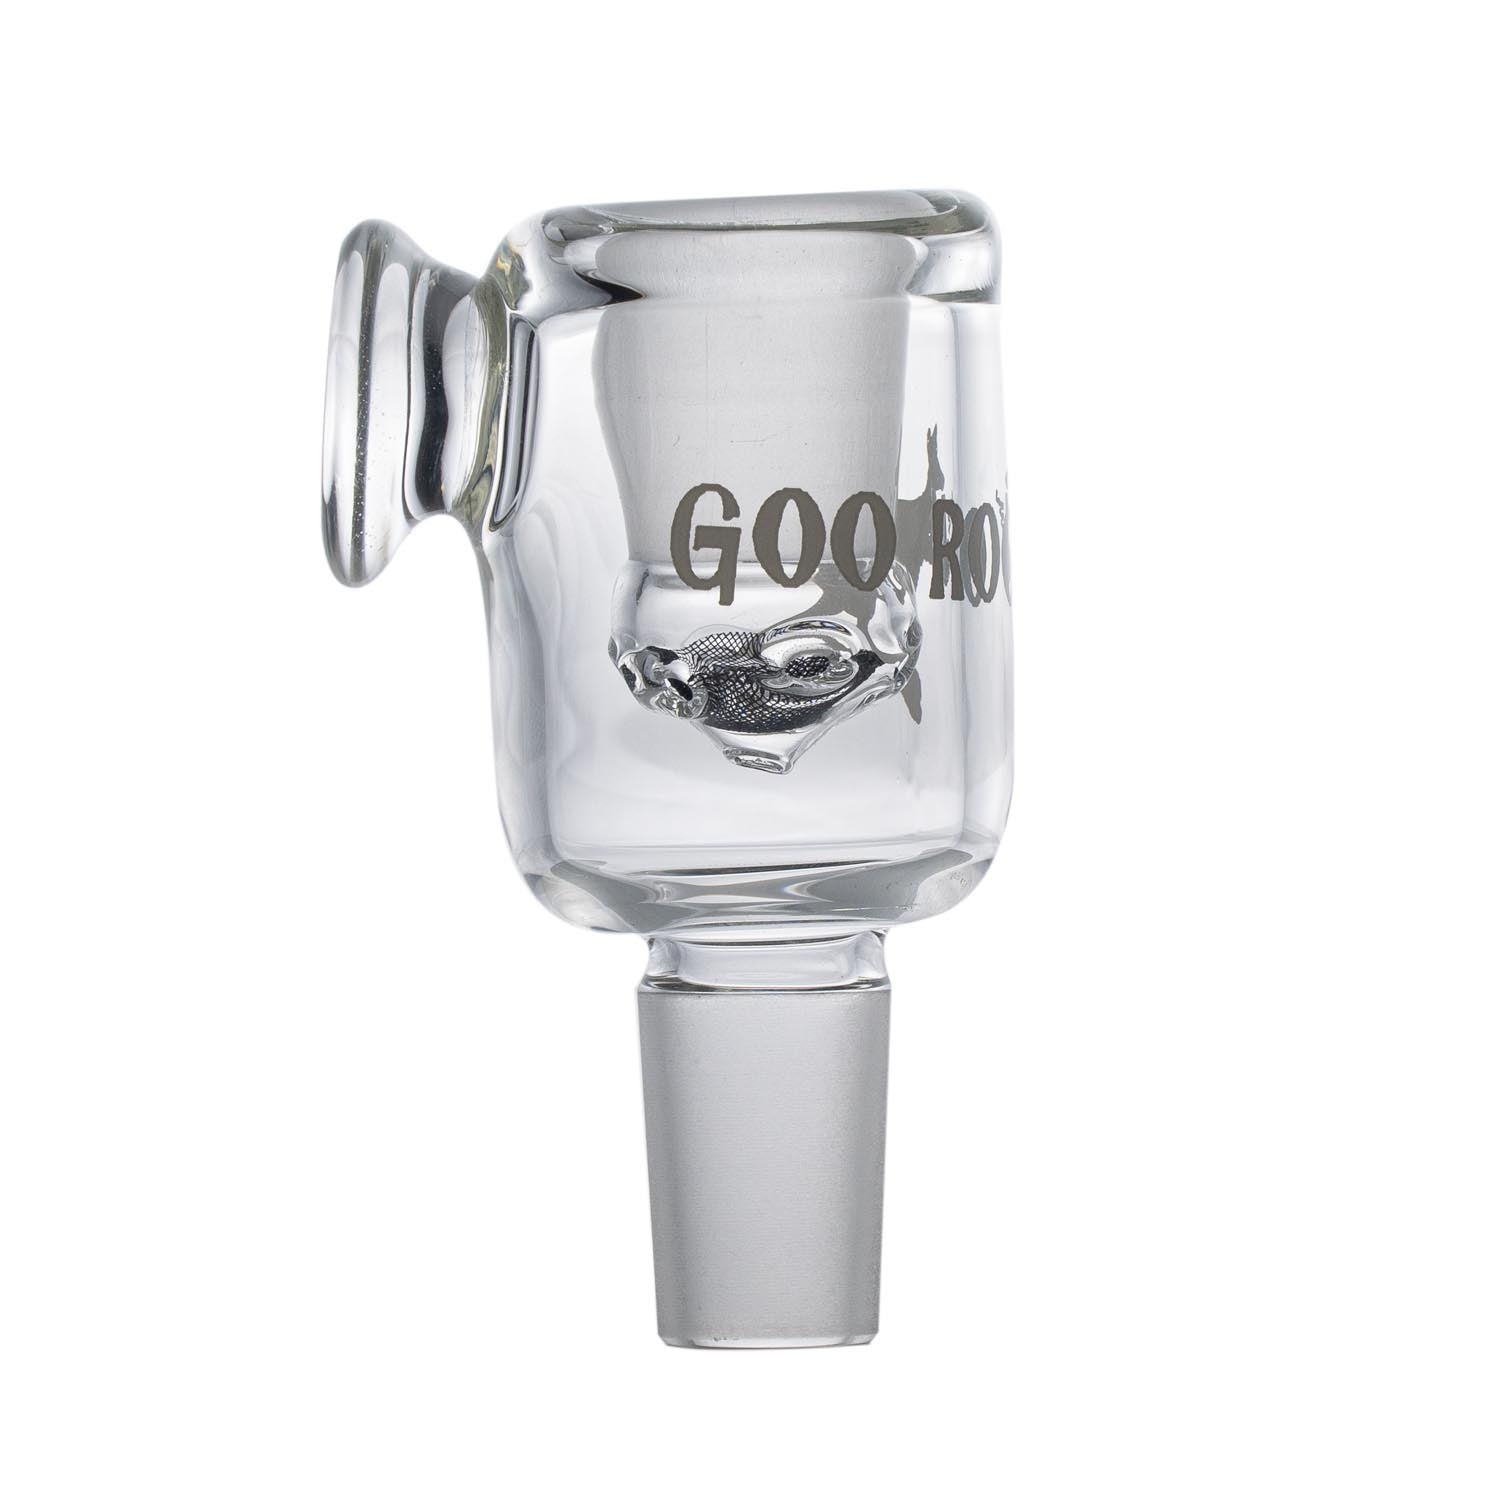 18.8mm Insulated Glass Injector Bowl by Goo Roo Designs (9443)